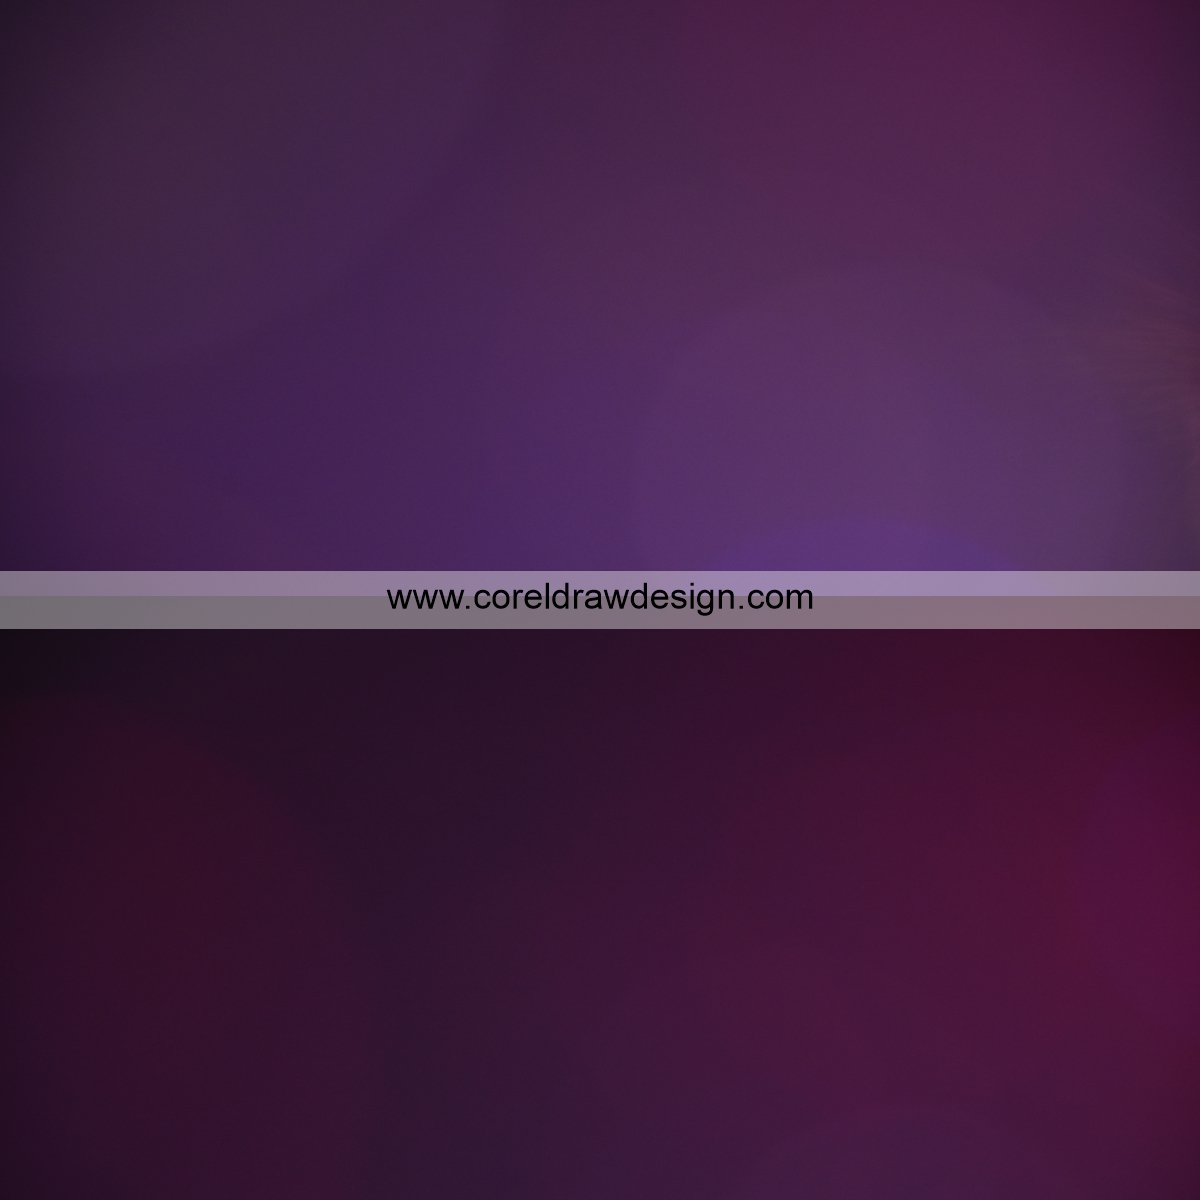 Abstract Gradient Image, Beautiful Blurry Background